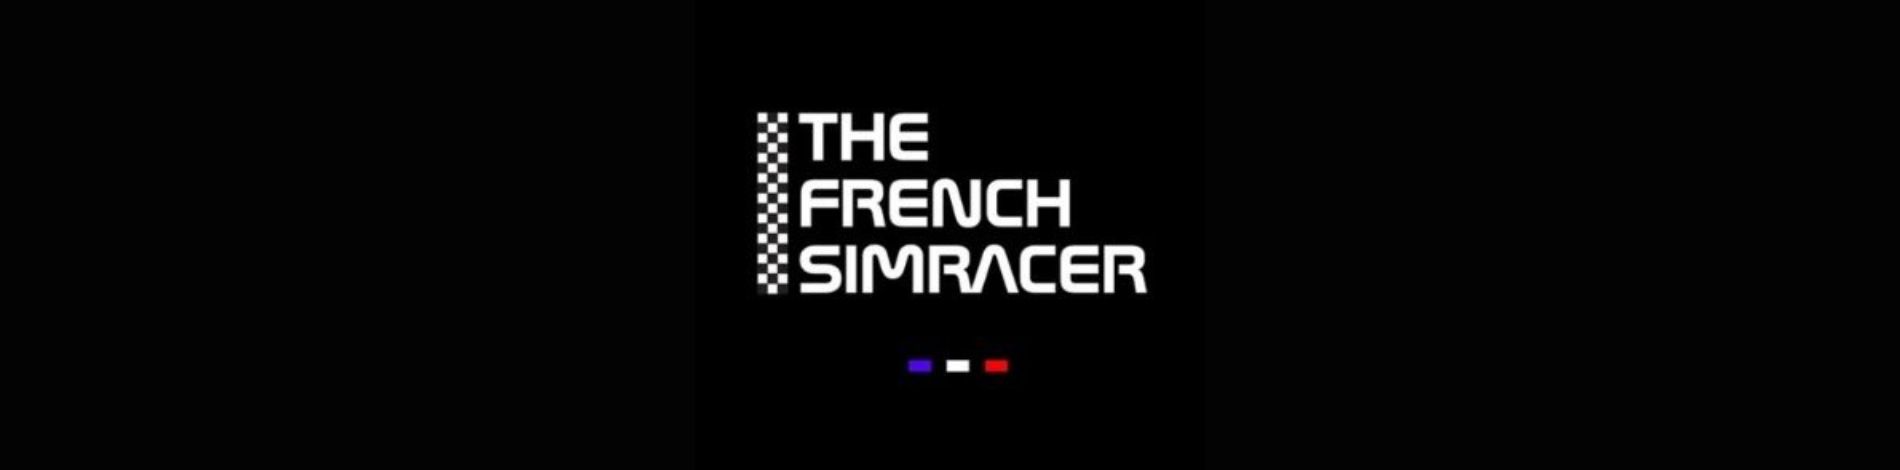 The French Simracer